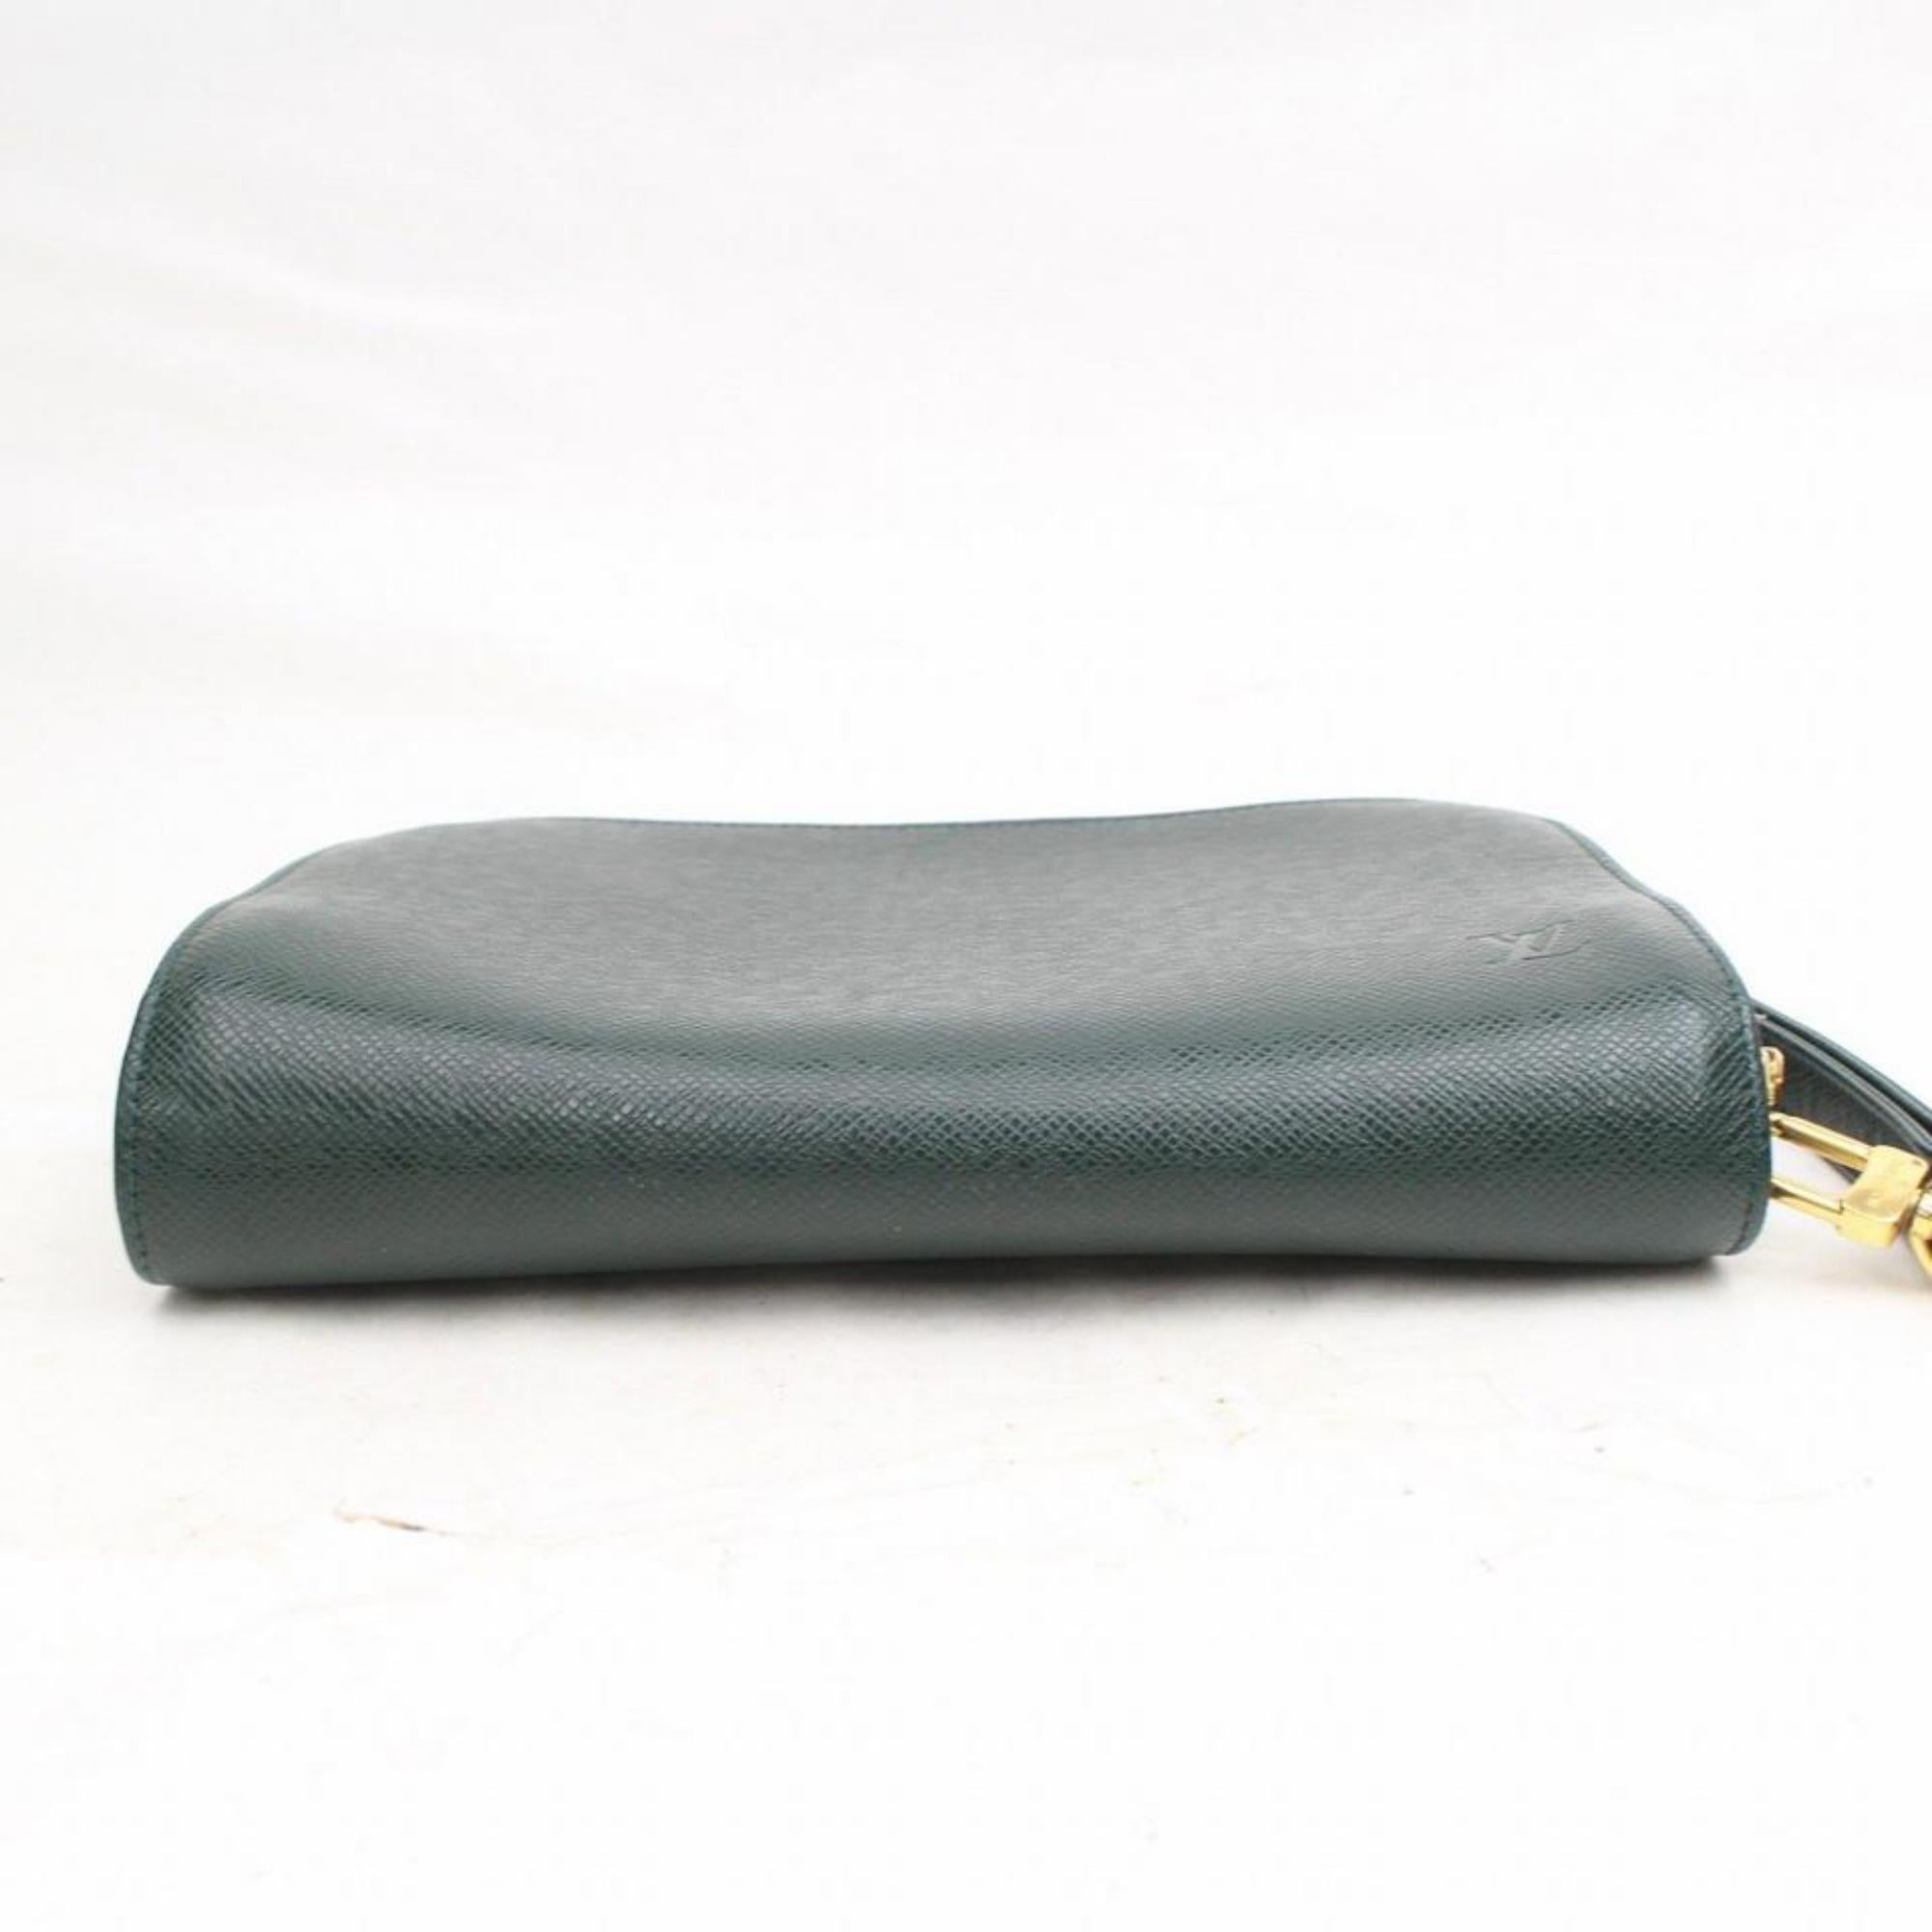 Louis Vuitton Green Orsay Epicea Taiga Leather Wristlet 868595 Cosmetic Bag For Sale 4